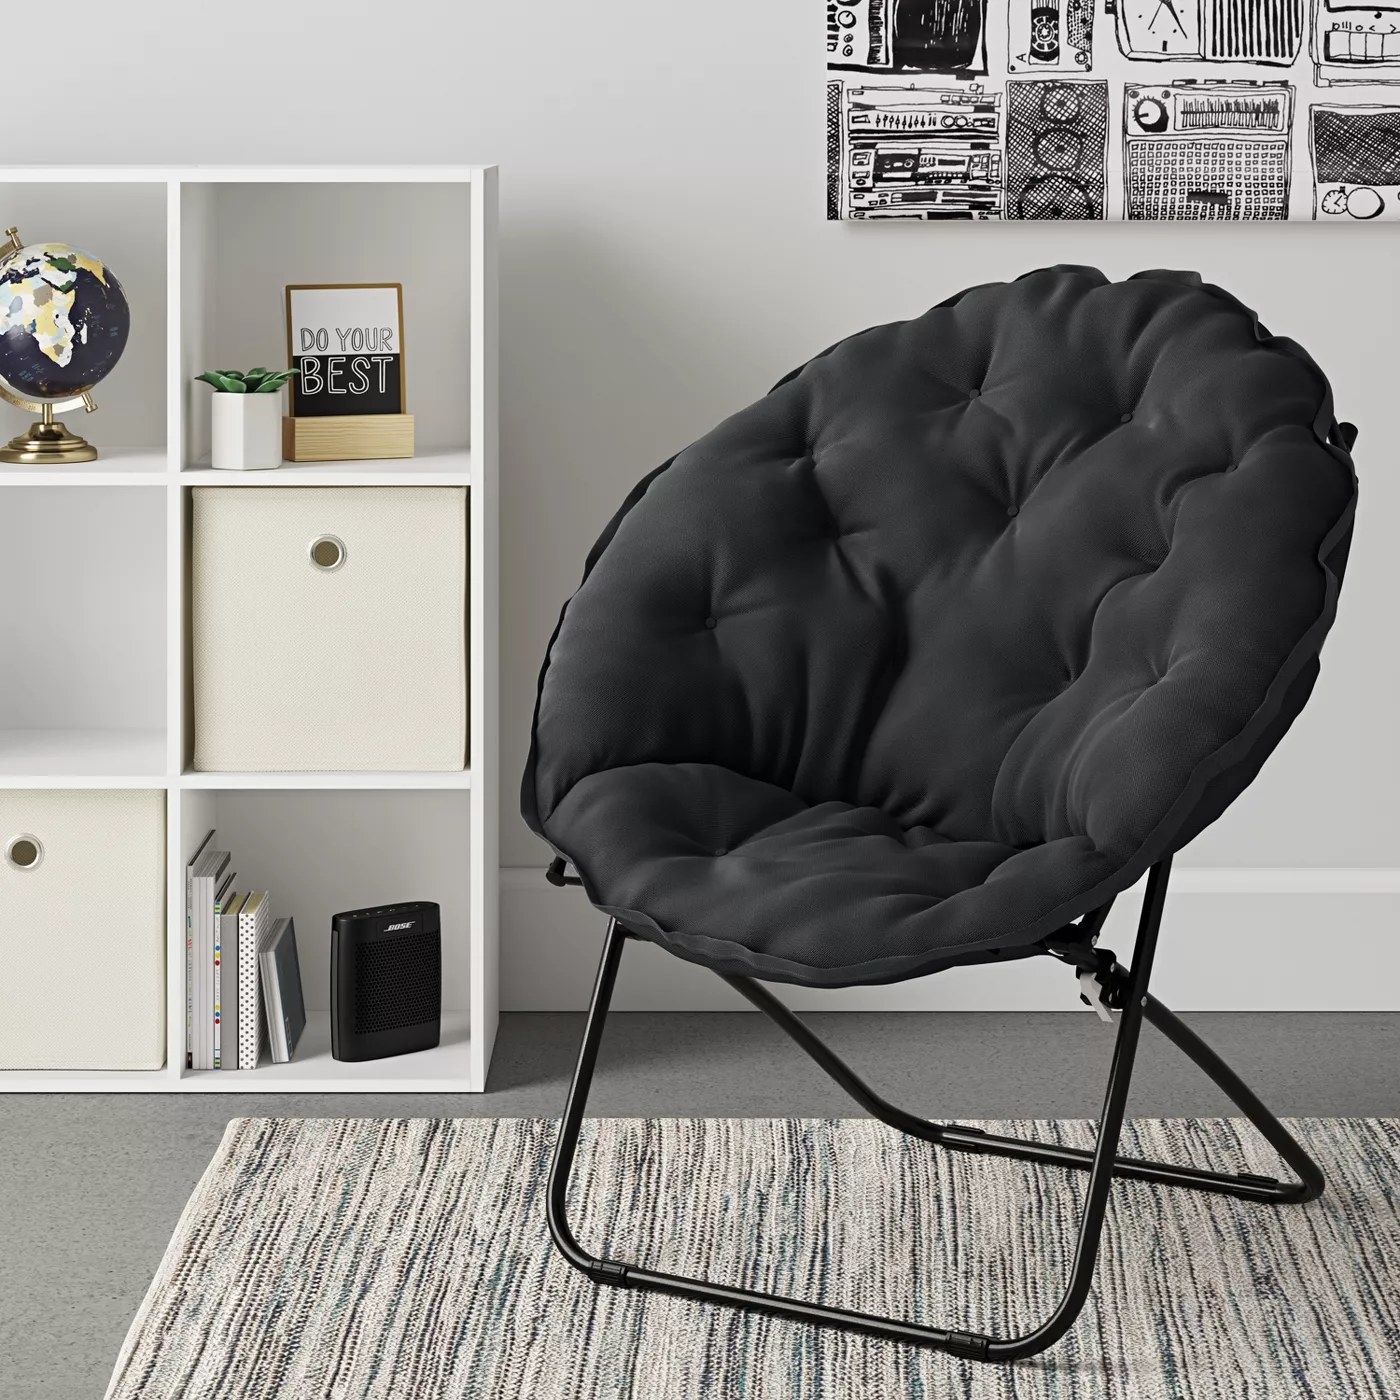 The dish-shaped chair with a tufted and cushioned seat